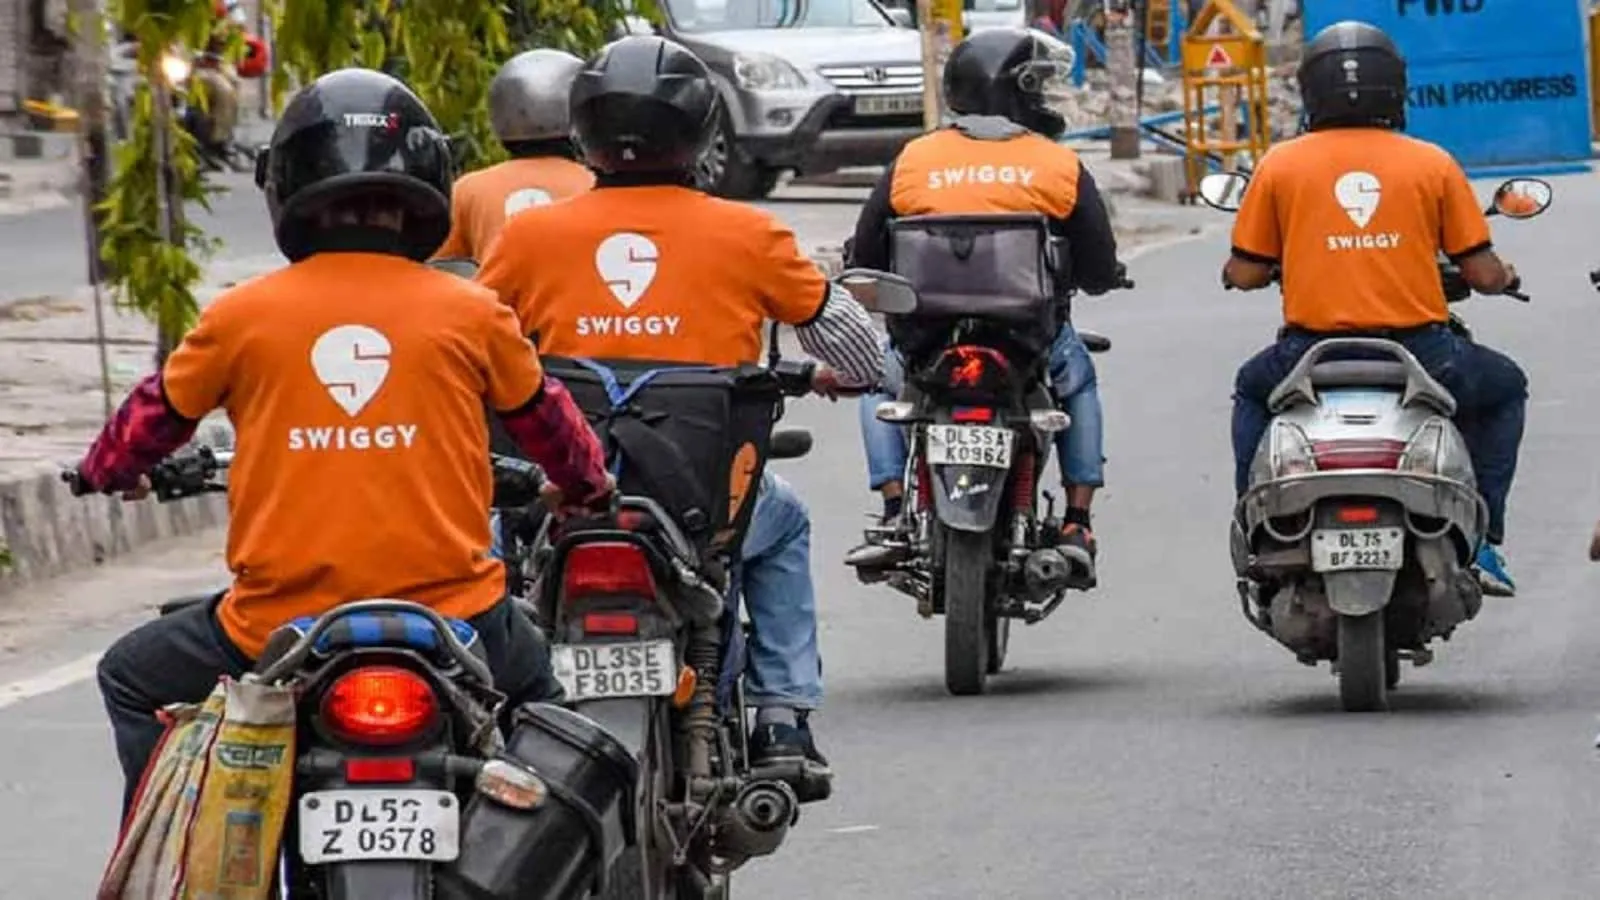 Swiggy's delivery boy steals pair of shoes